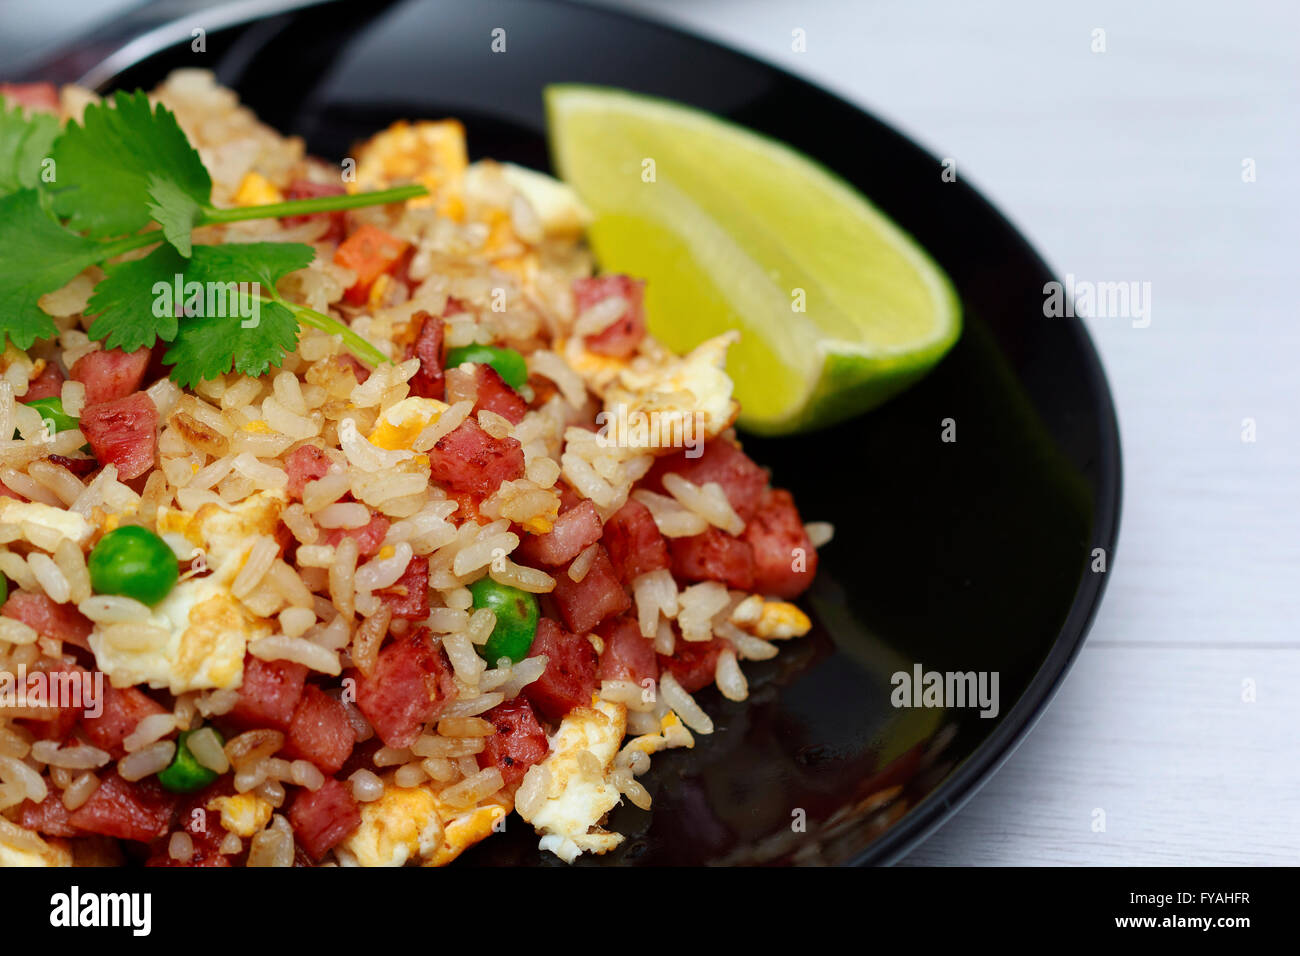 Dice Bacon Fried rice in black dish Stock Photo